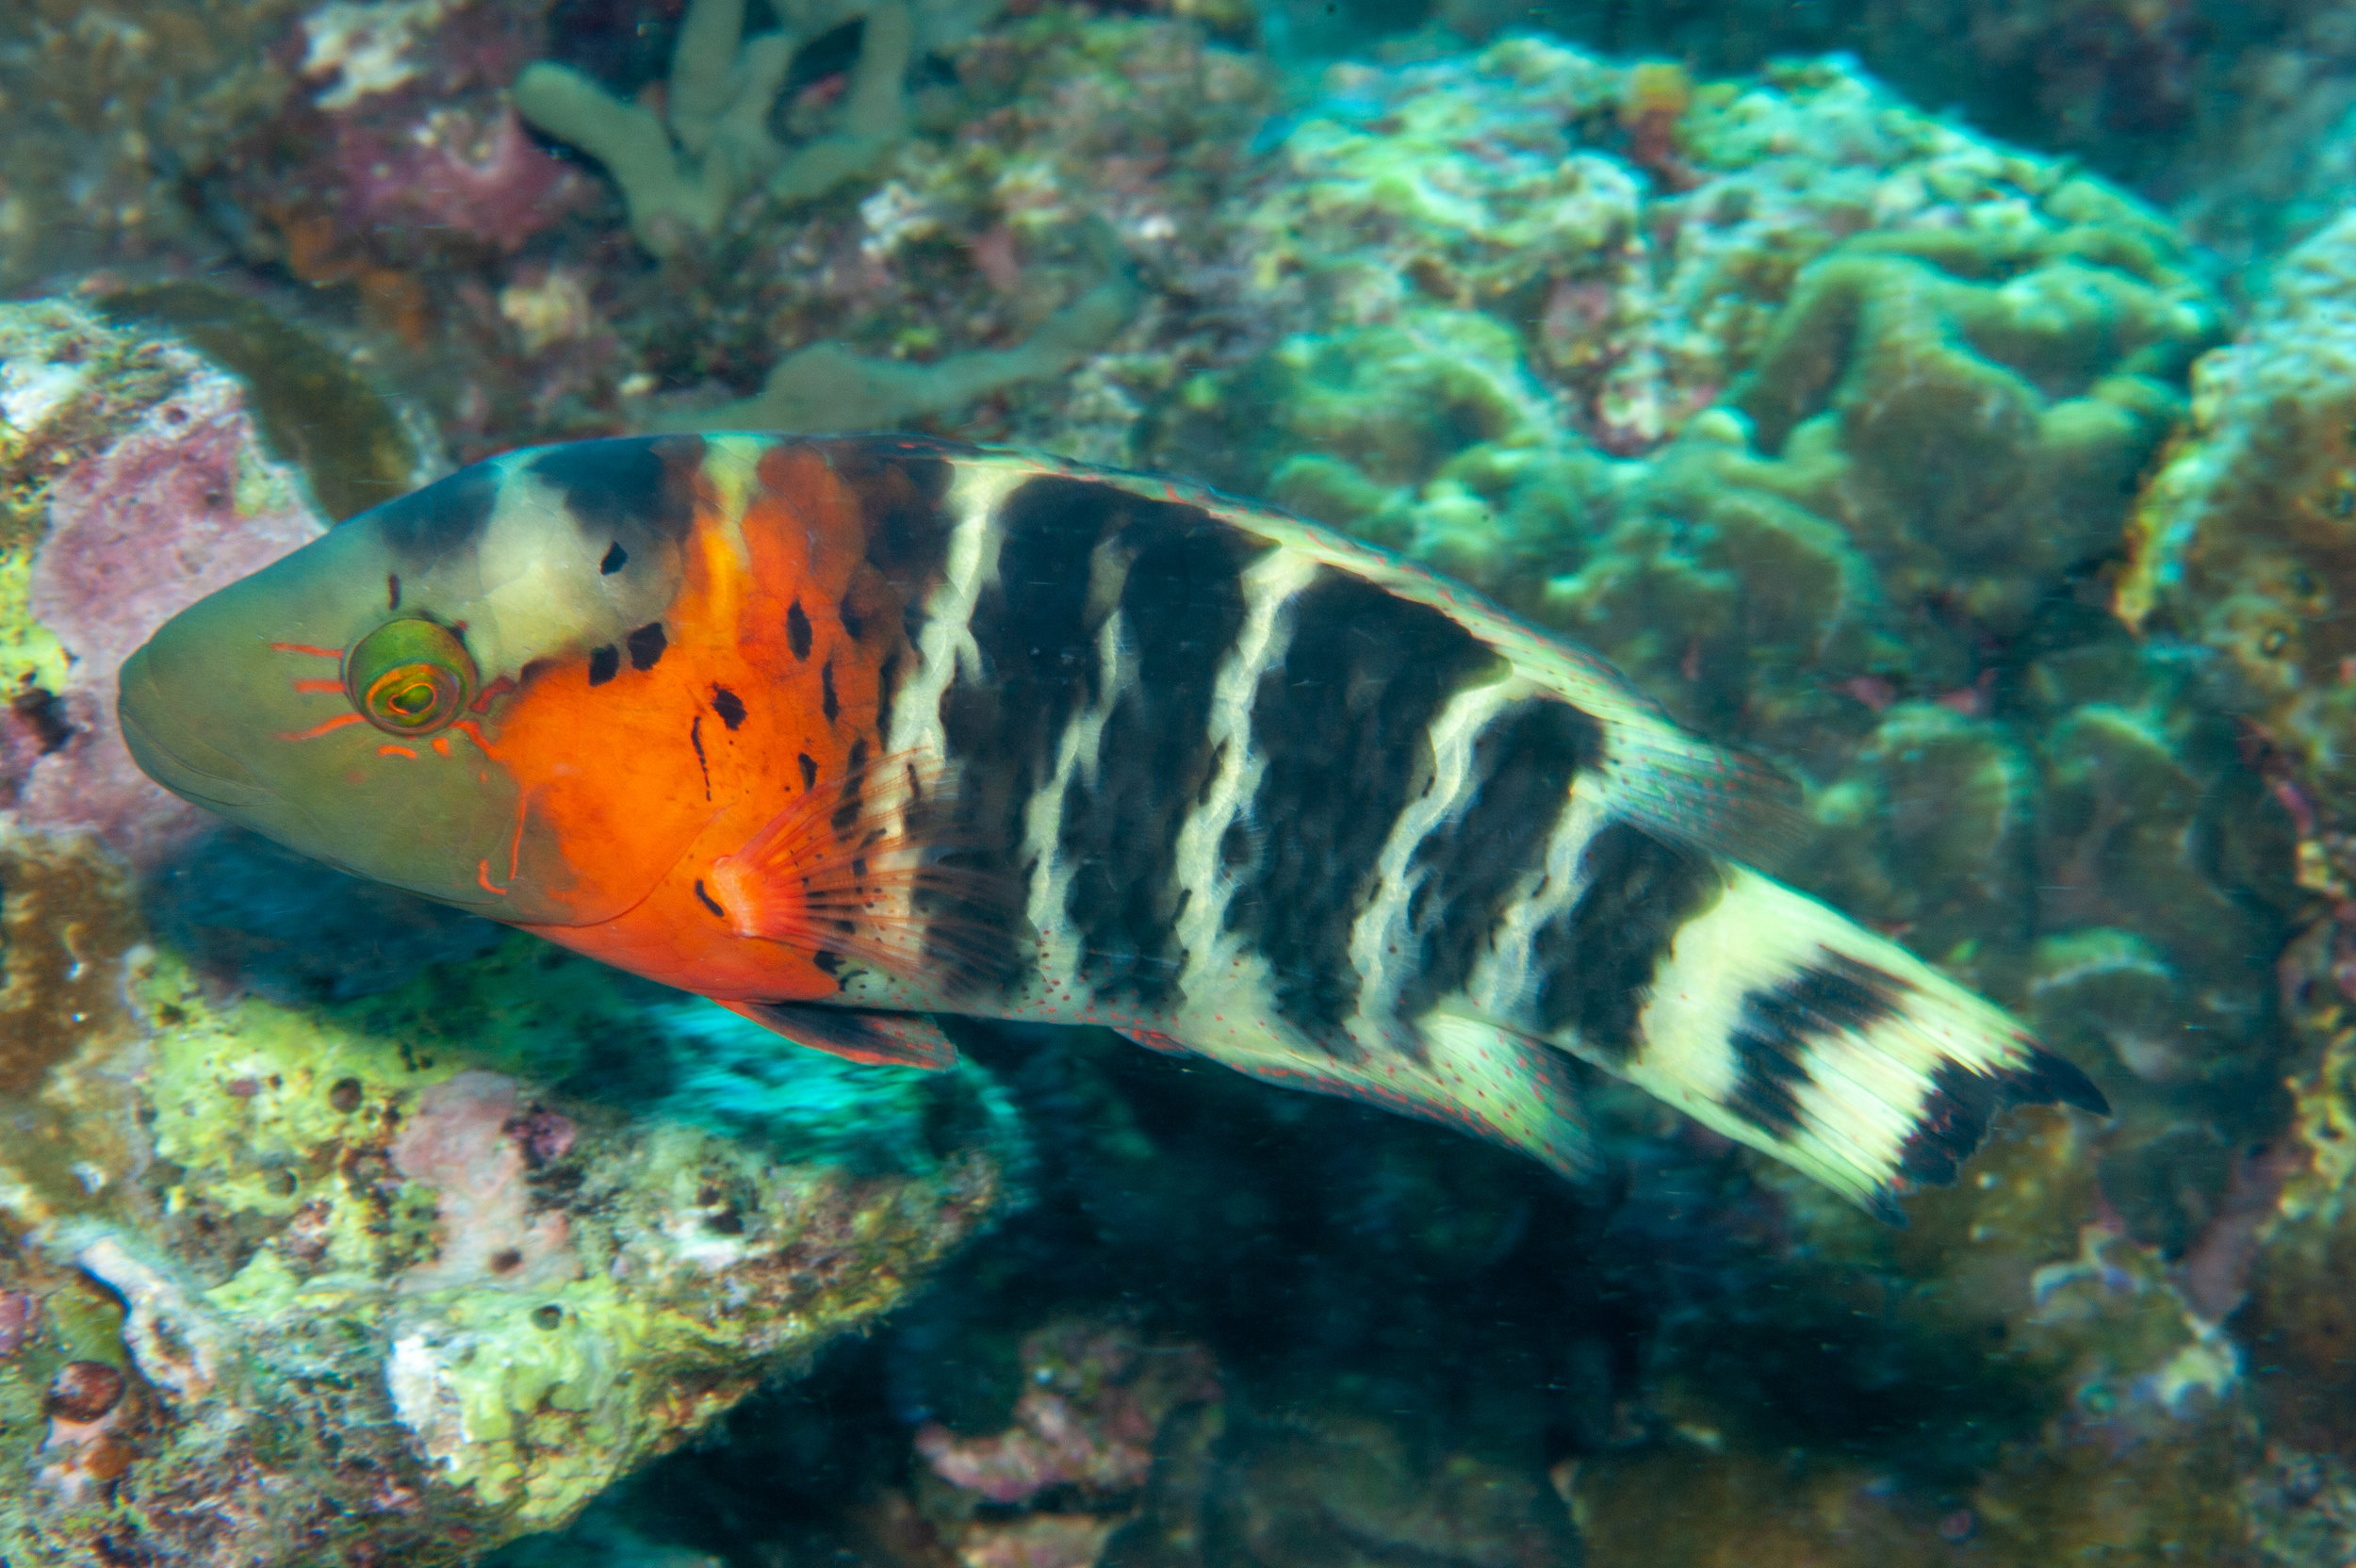 Redbreasted wrasse - Cheilinus fasciatus, Ake's Reef, Father's Reefs